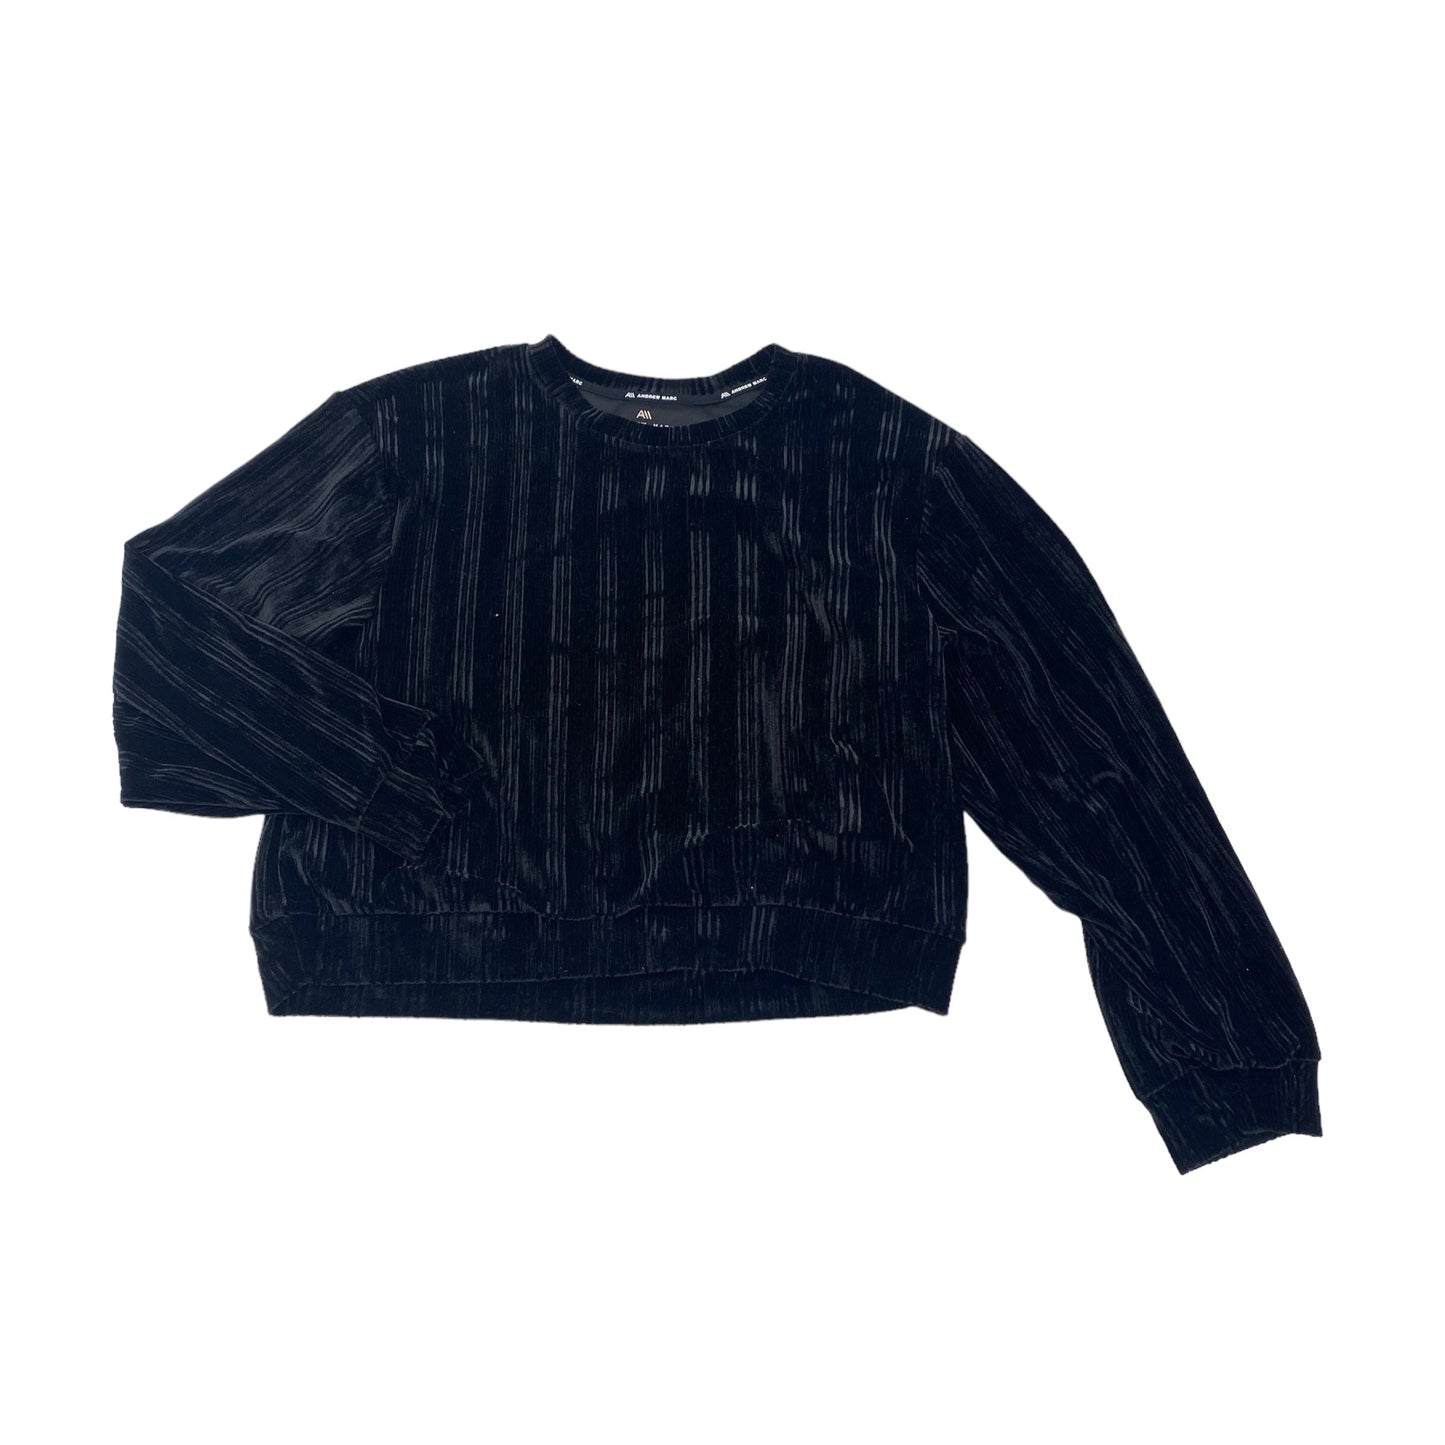 Athletic Top Long Sleeve Crewneck By Andrew Marc  Size: M